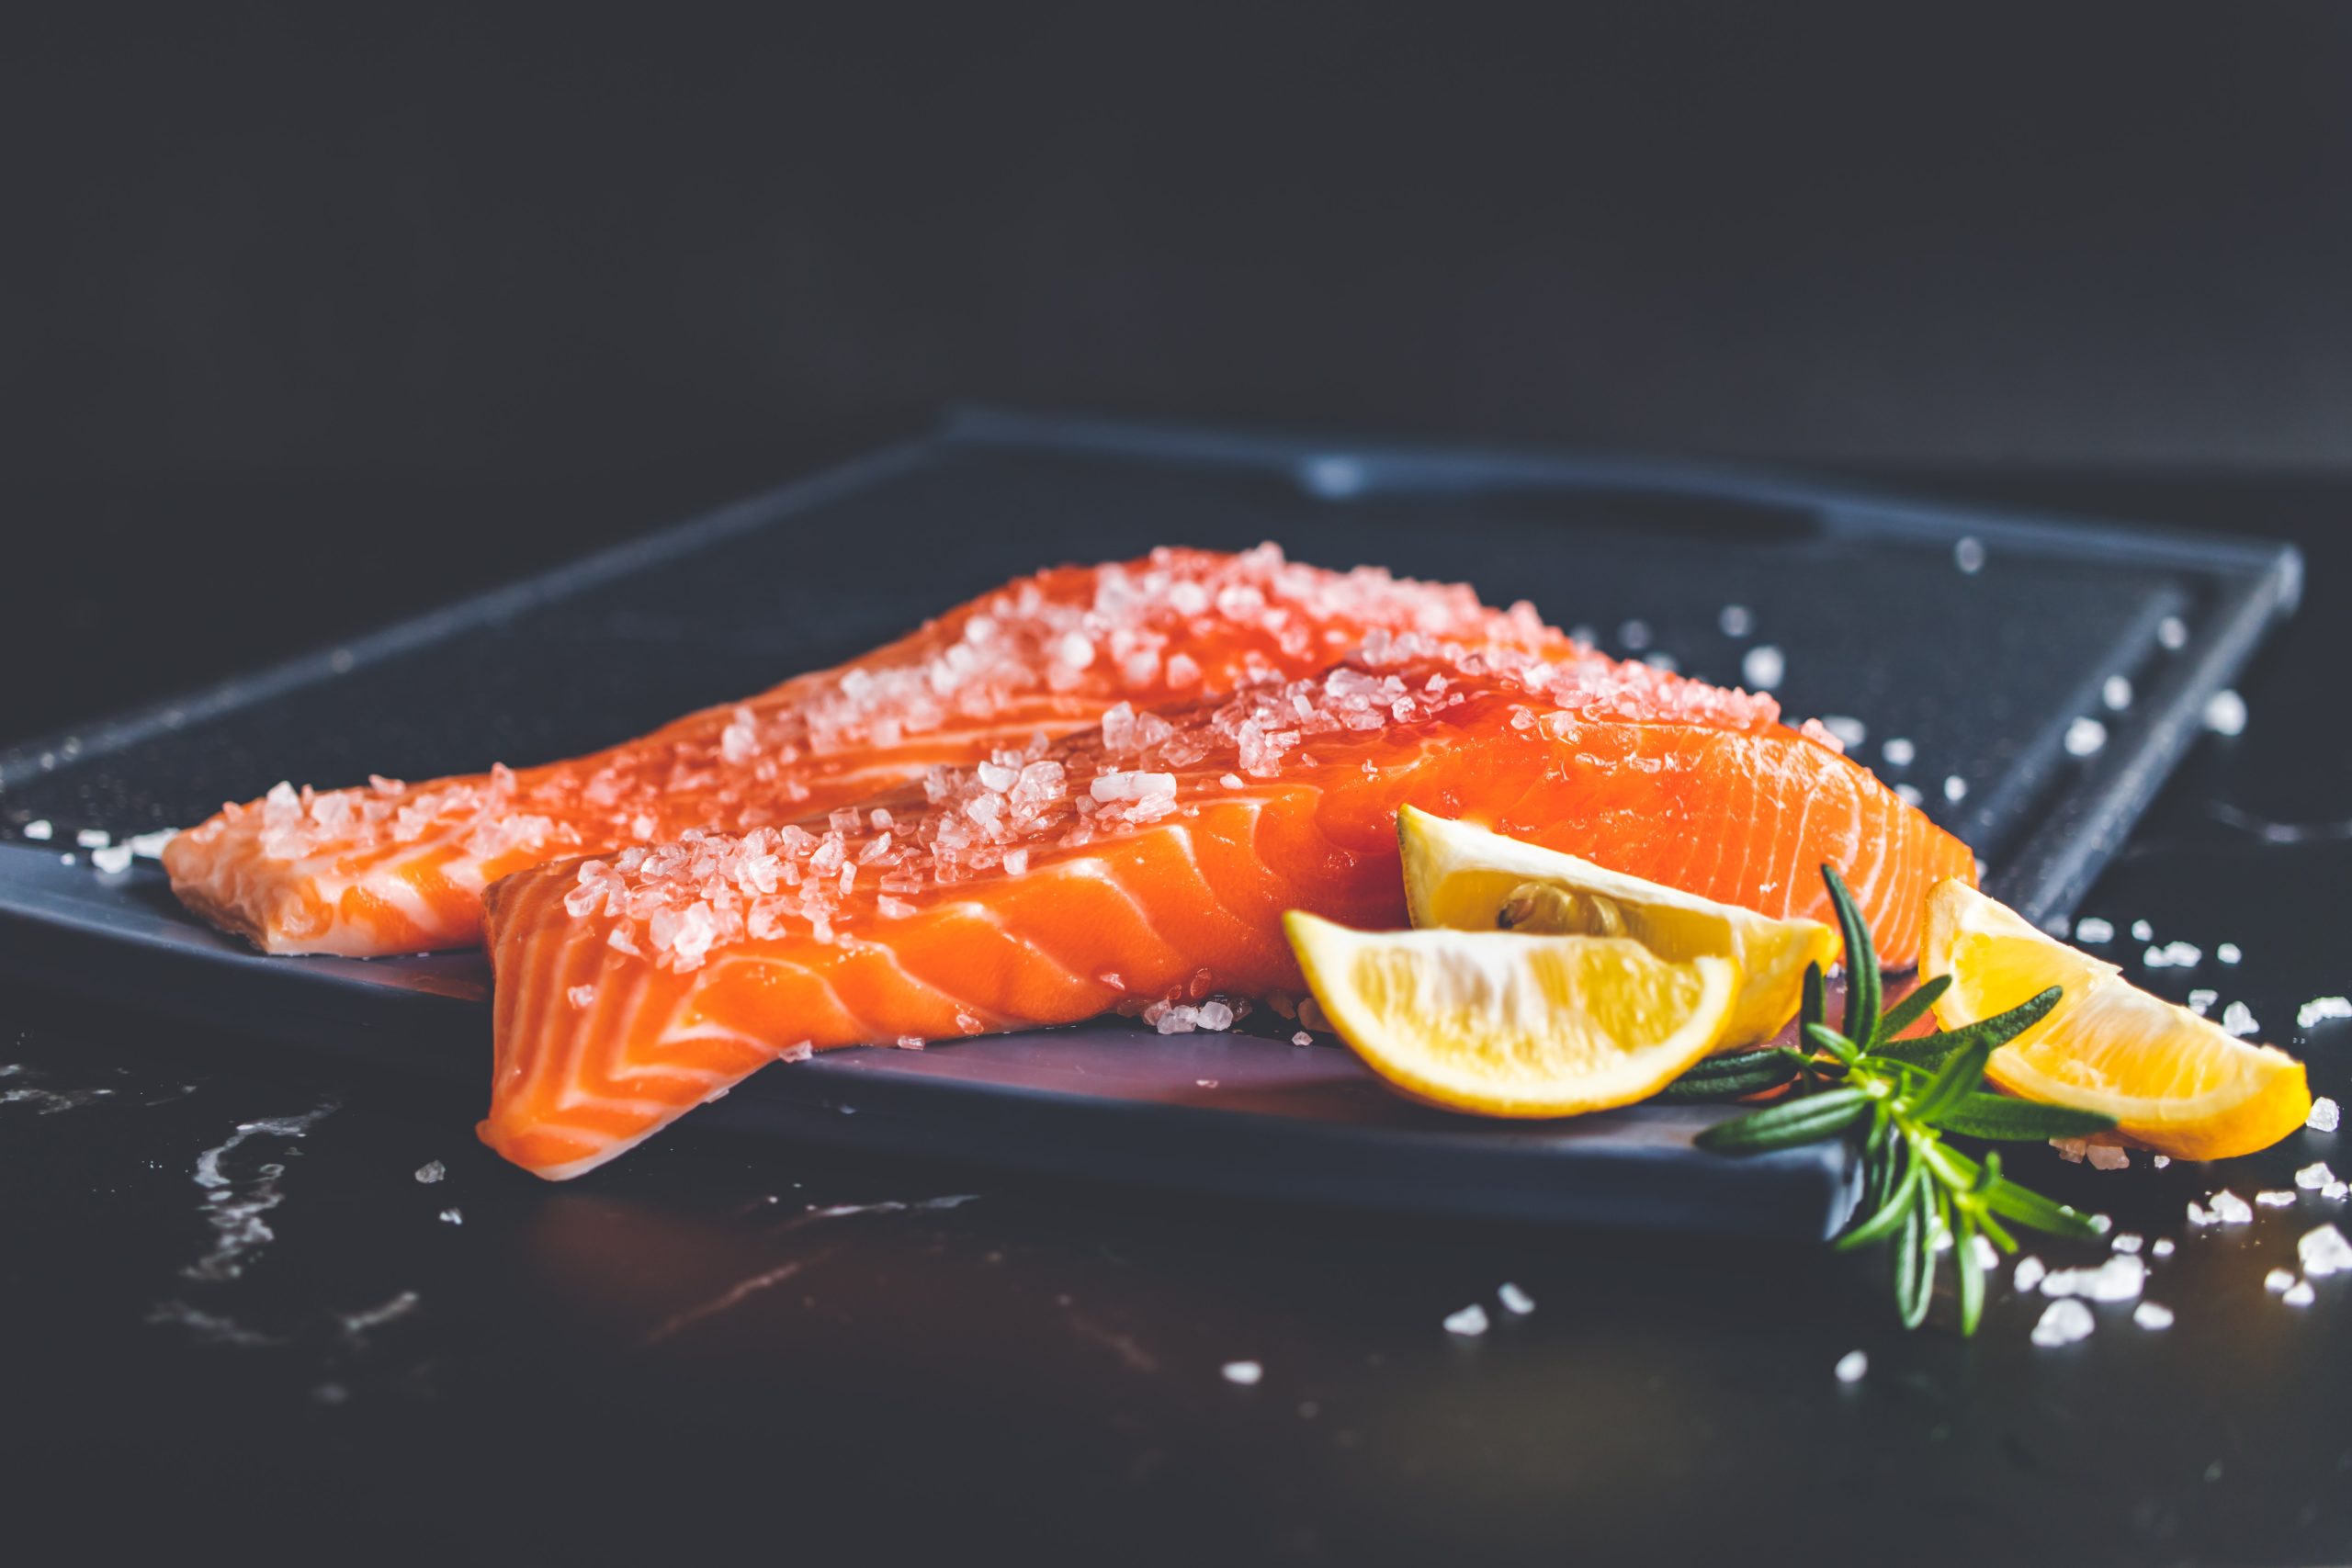 How long to bake salmon at 400